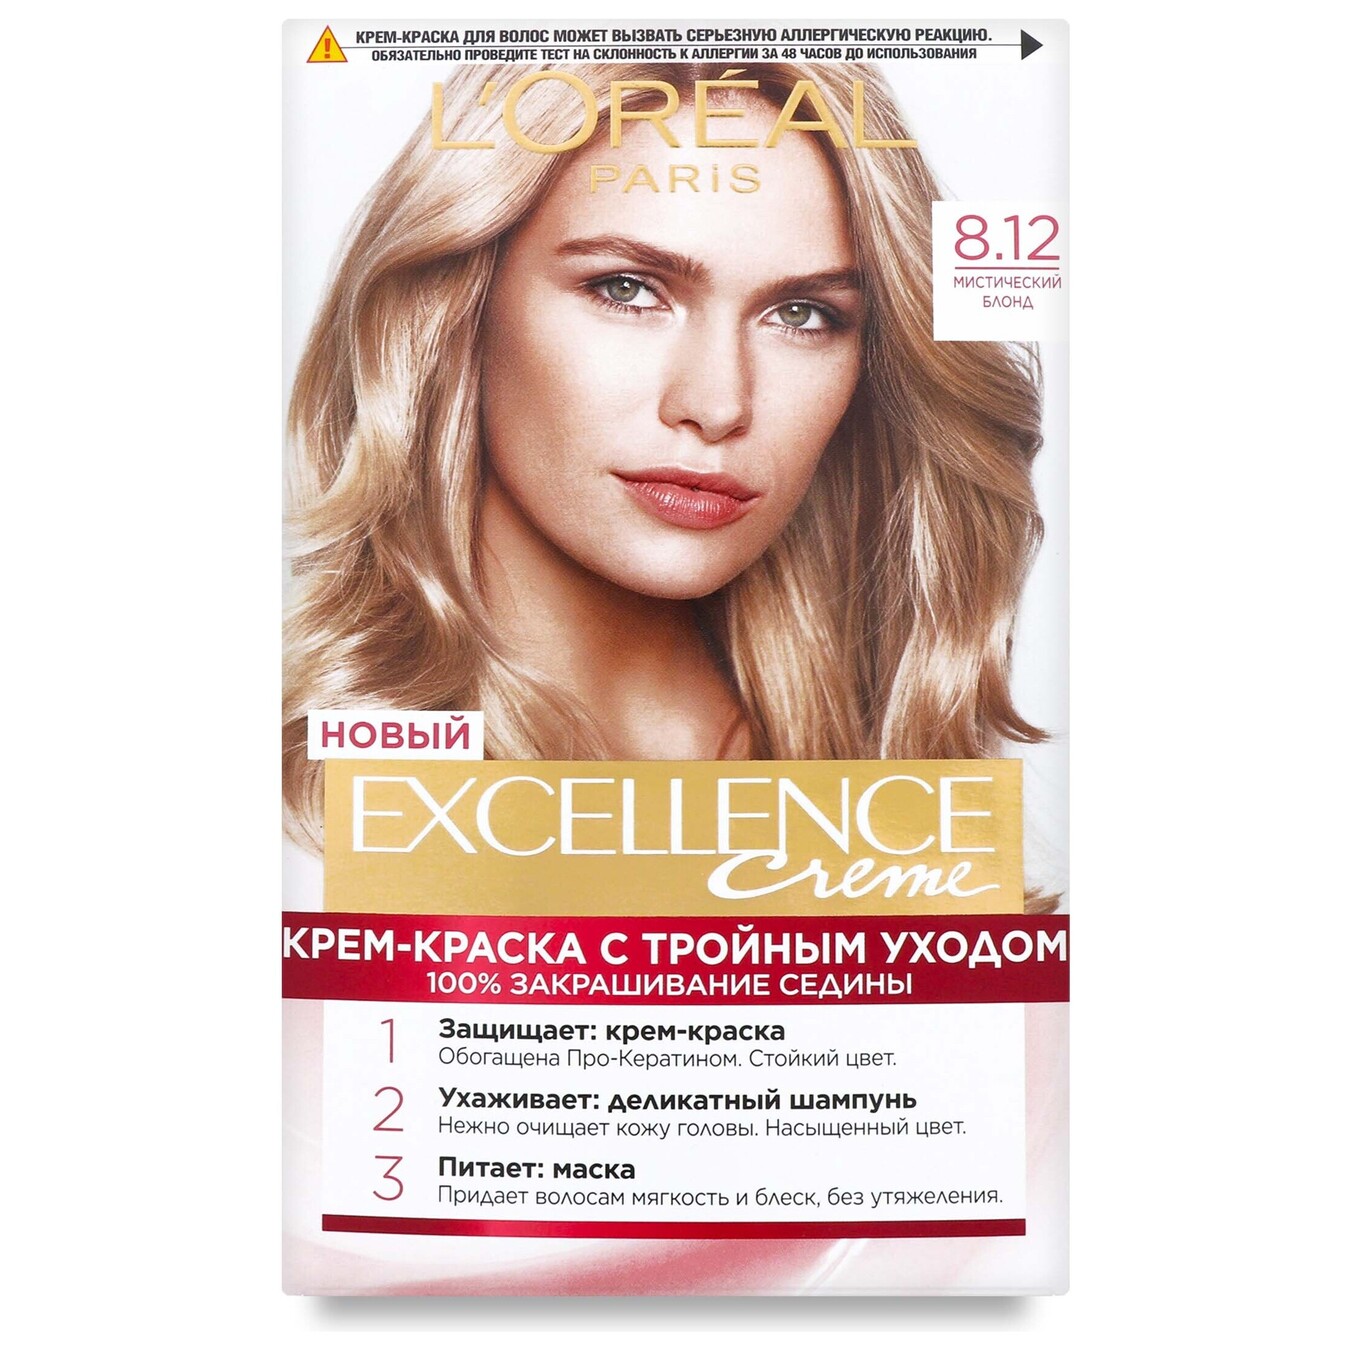 Loreal hair color cream with pro-keratin Excellence Crème tone 8.12